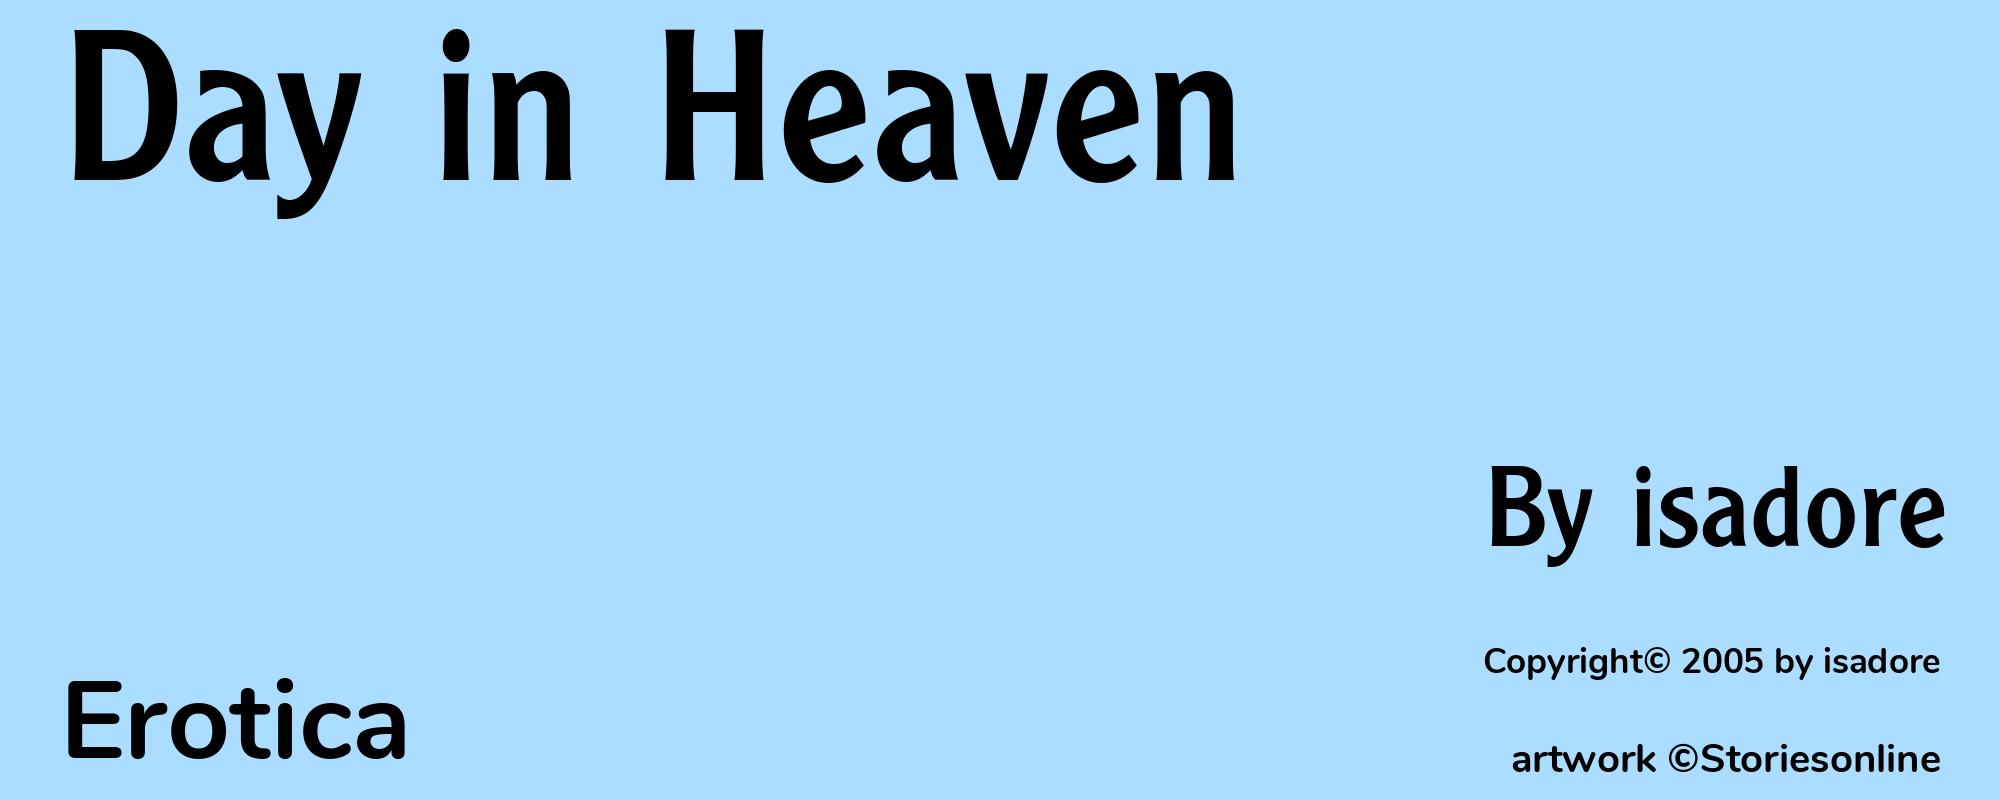 Day in Heaven - Cover